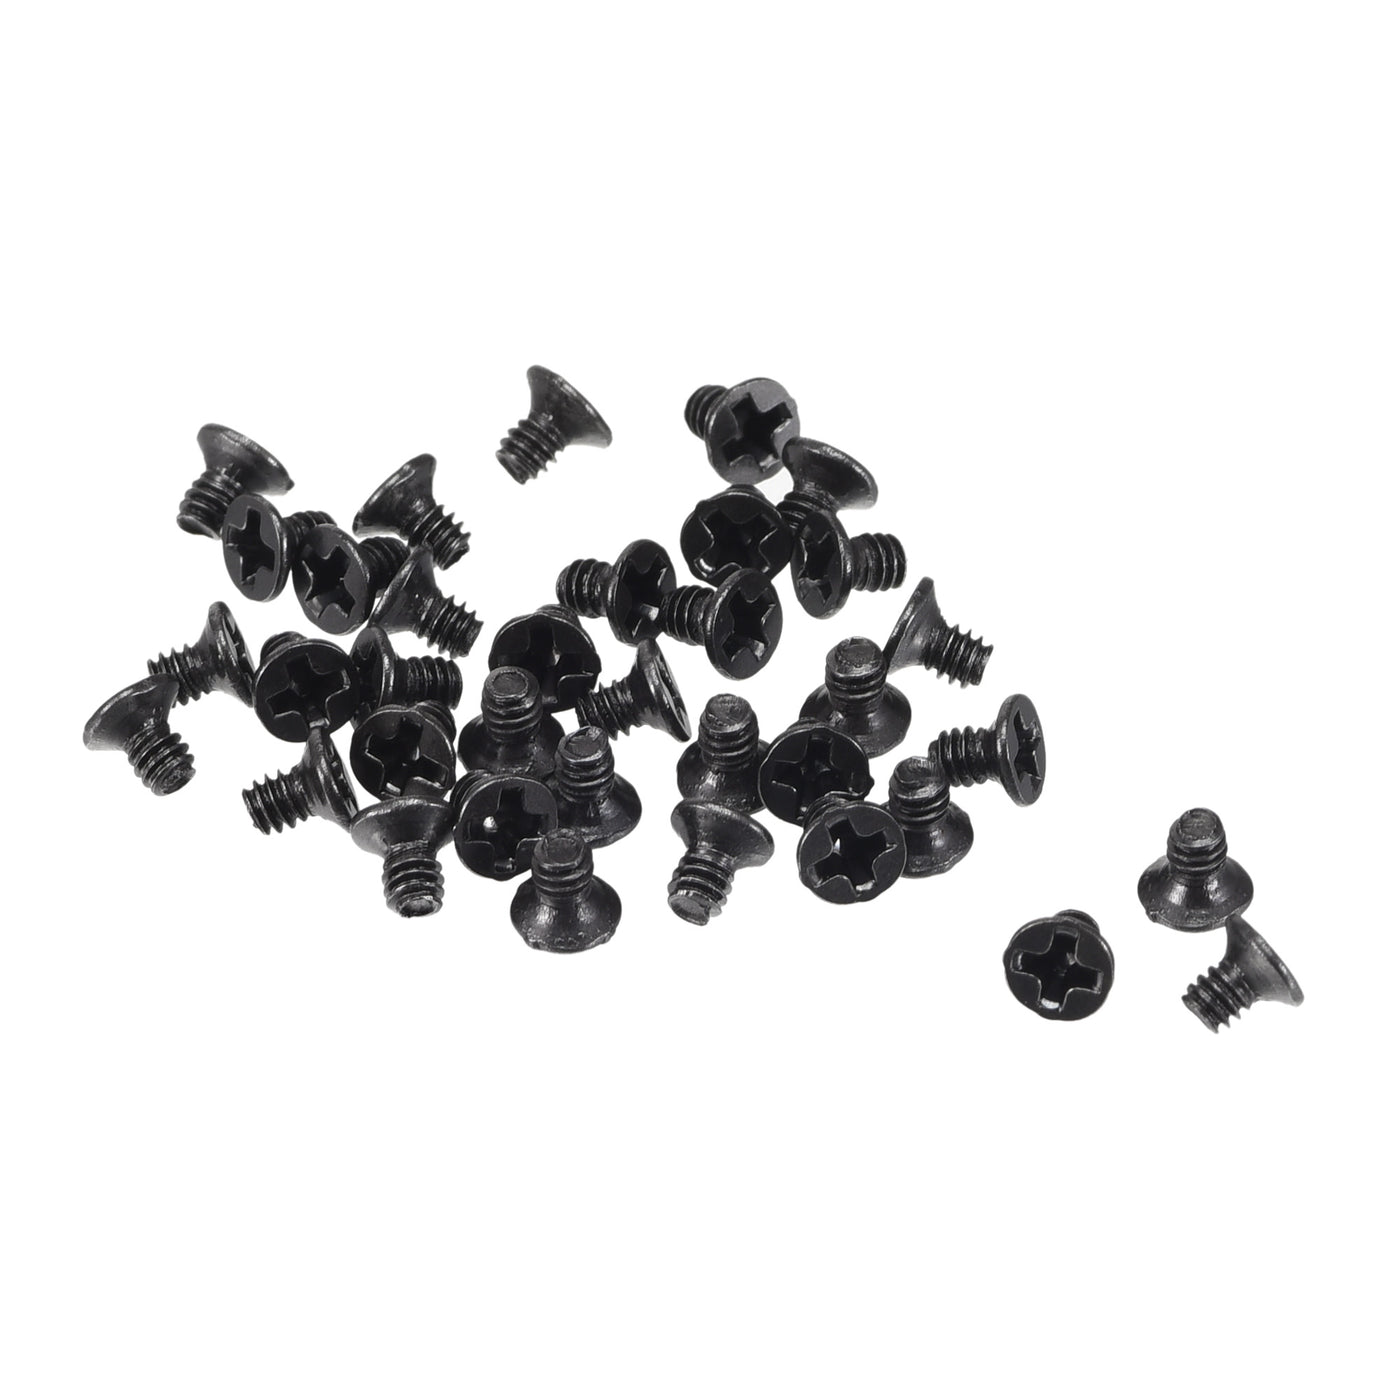 uxcell Uxcell M2 x 3mm Phillips Flat Head Screws Carbon Steel Machine Screws Black for Home Office Computer Case Appliance Equipment 350pcs